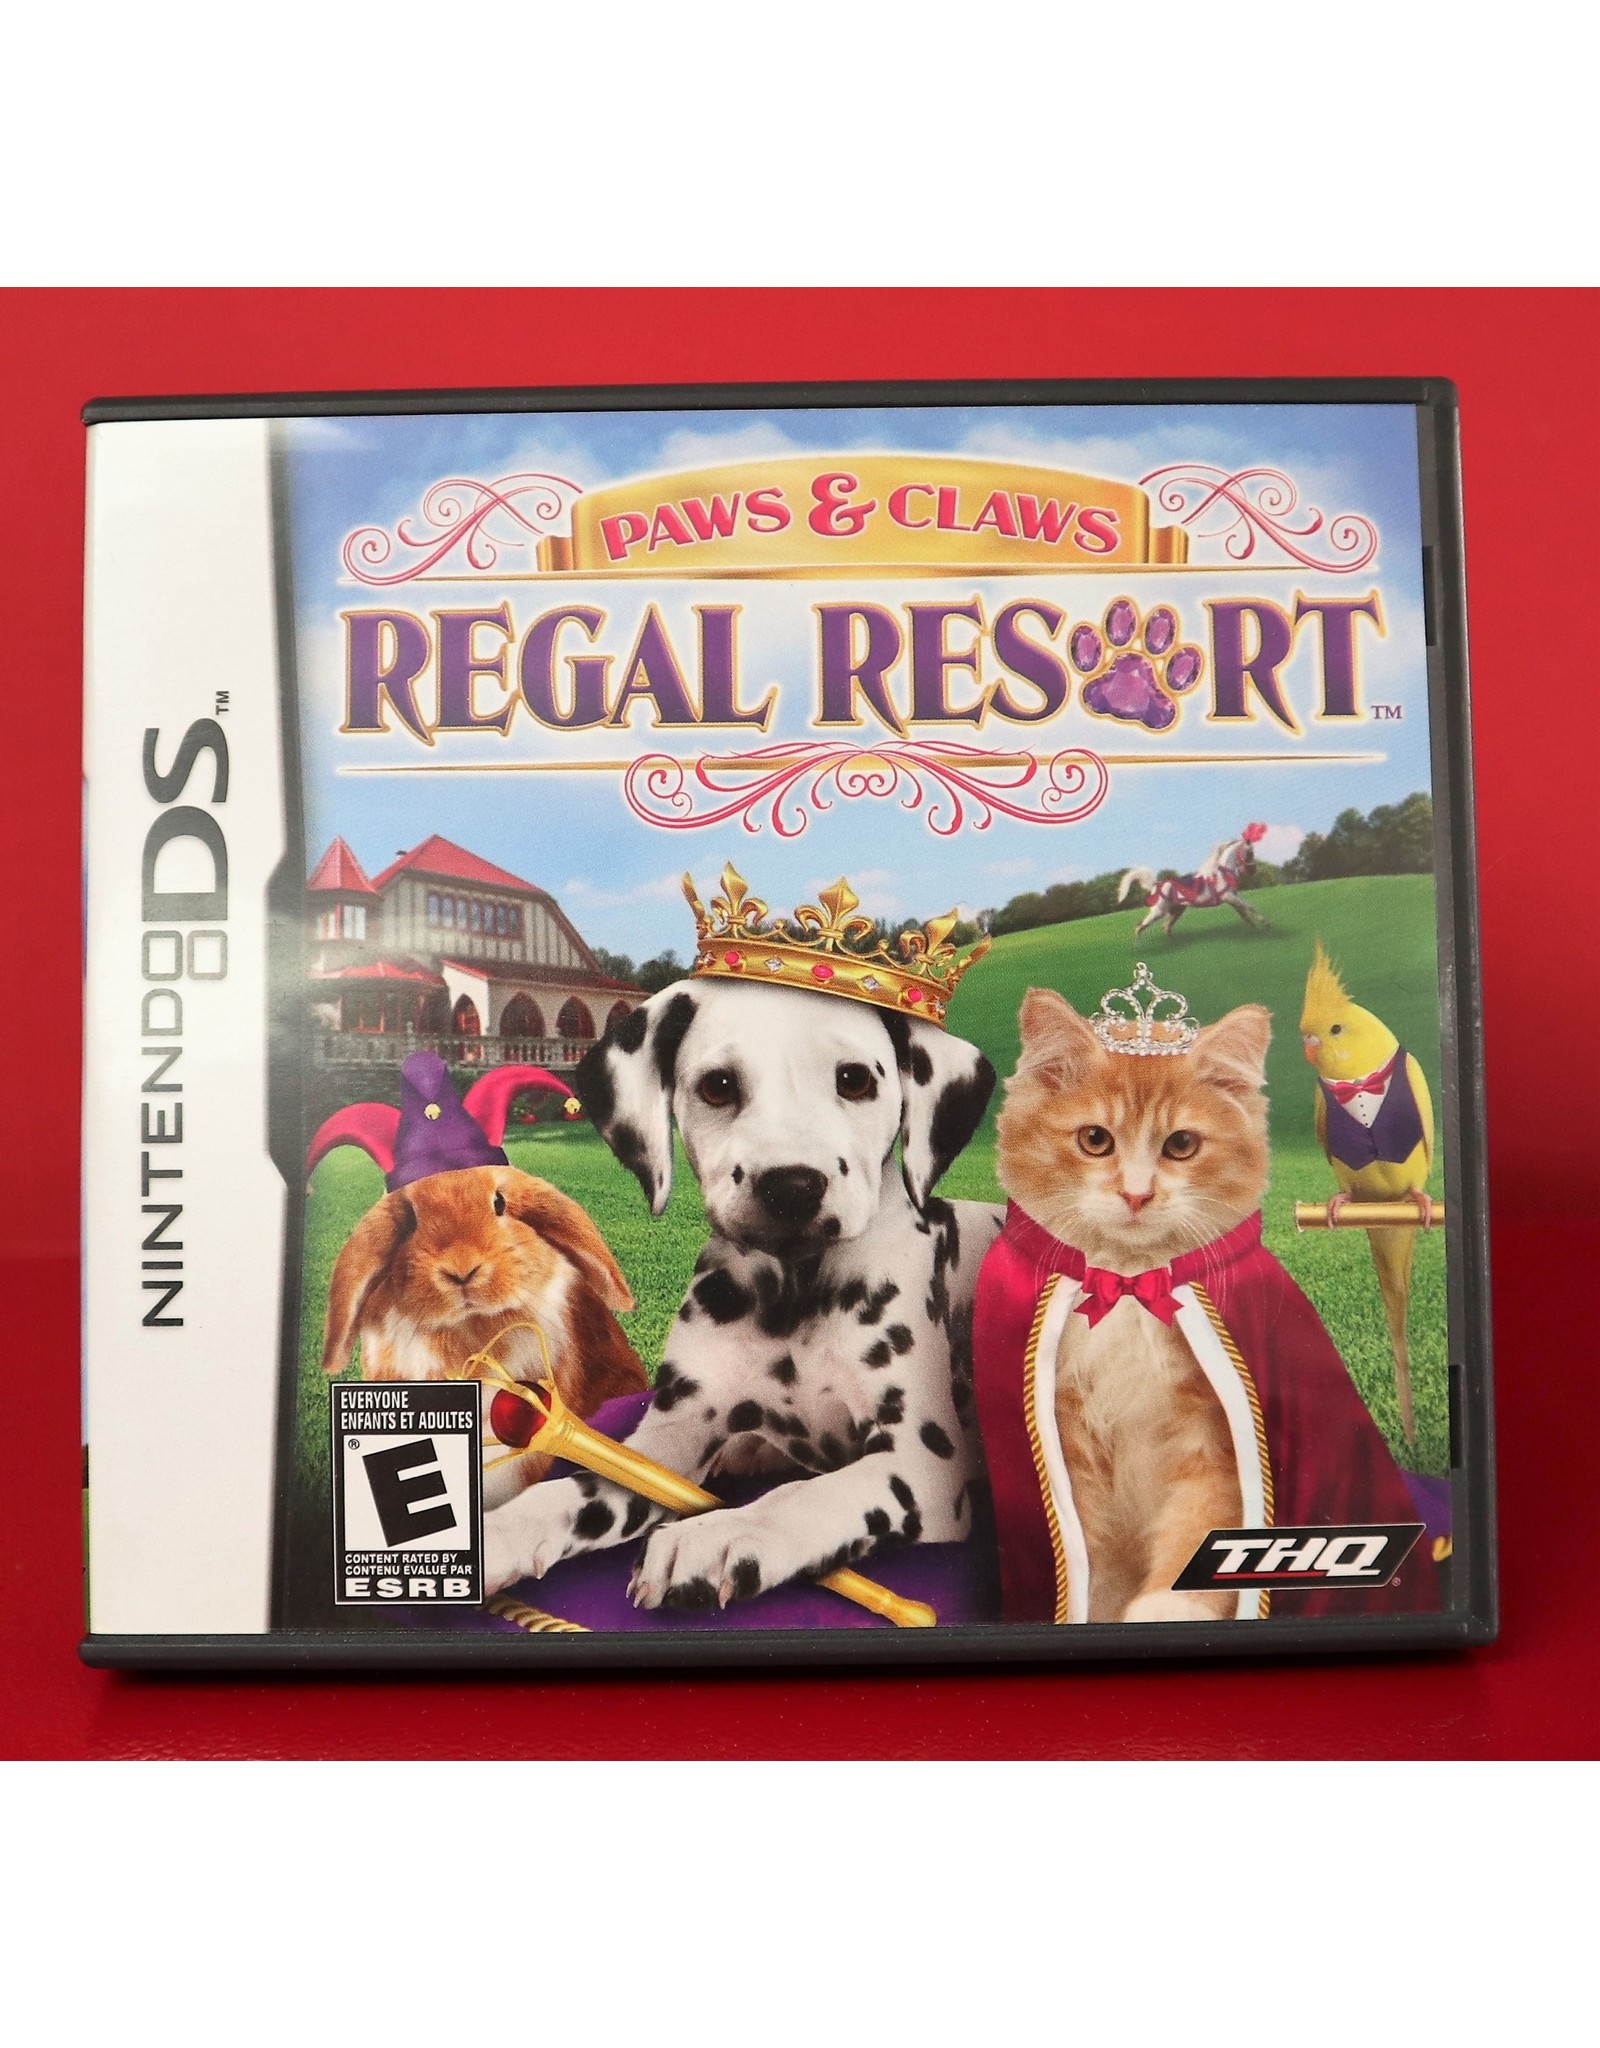 Used Game - Nintendo DS -  Paws & Claws Regal Resort [Cart & Box]